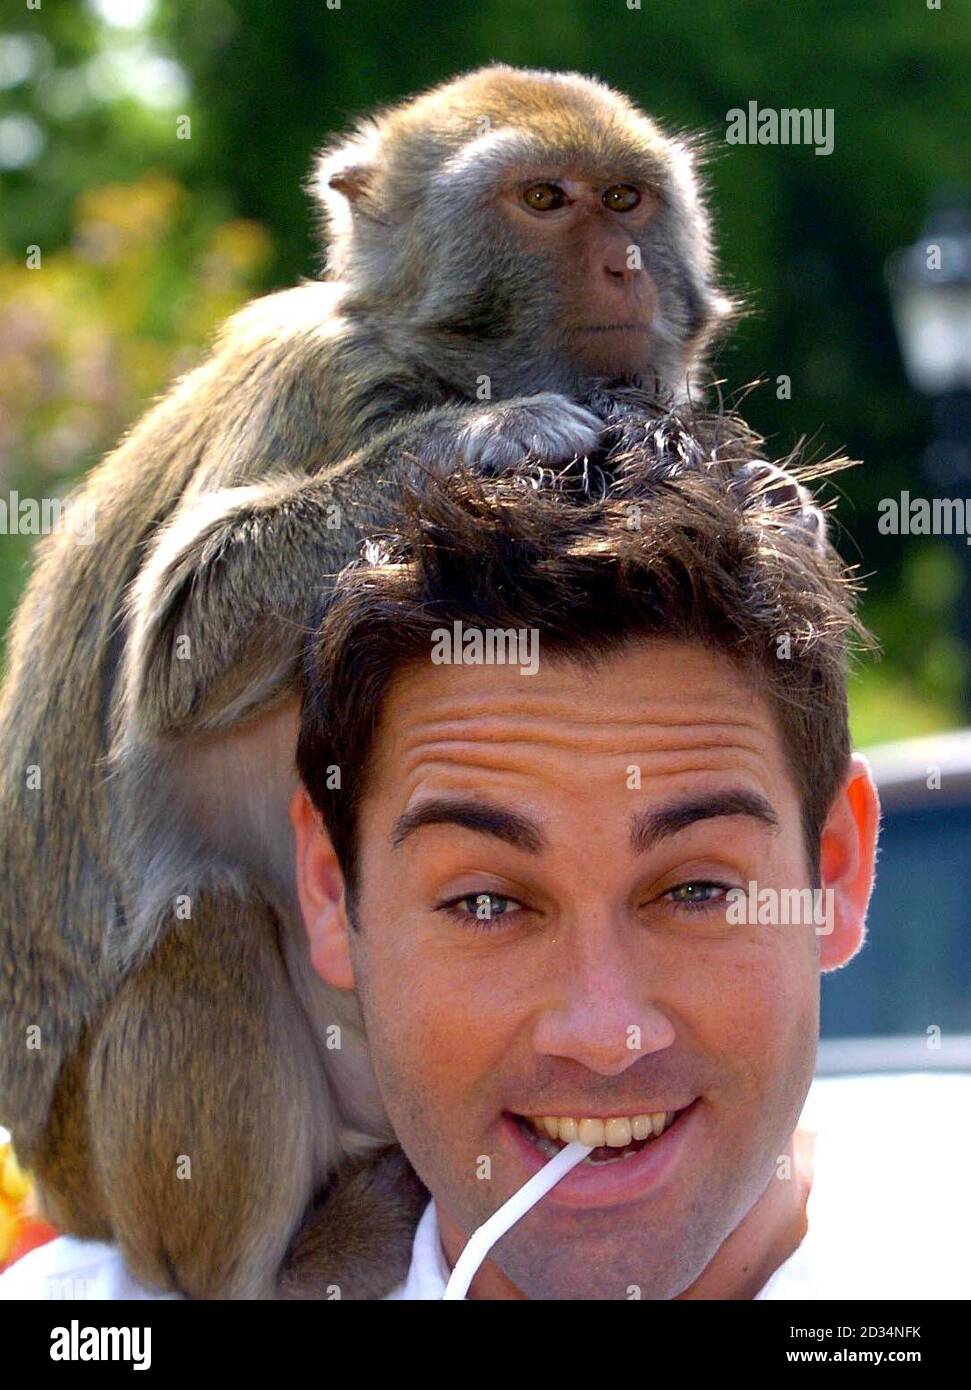 Katy the Rhesus monkey gets acquainted with actor Giles Vickers-Jones in London's Regents Park, during an advertising shoot. PRESS ASSOCIATION Photo. Picture date: Wednesday May 10, 2006. The fantasy advert, for exotic fruit drink Rubicon, features Giles Vickers-Jones riding through the park in a rickshaw. PRESS ASSOCIATION Photo. Photo credit should read: Ian Nicholson/PA Stock Photo